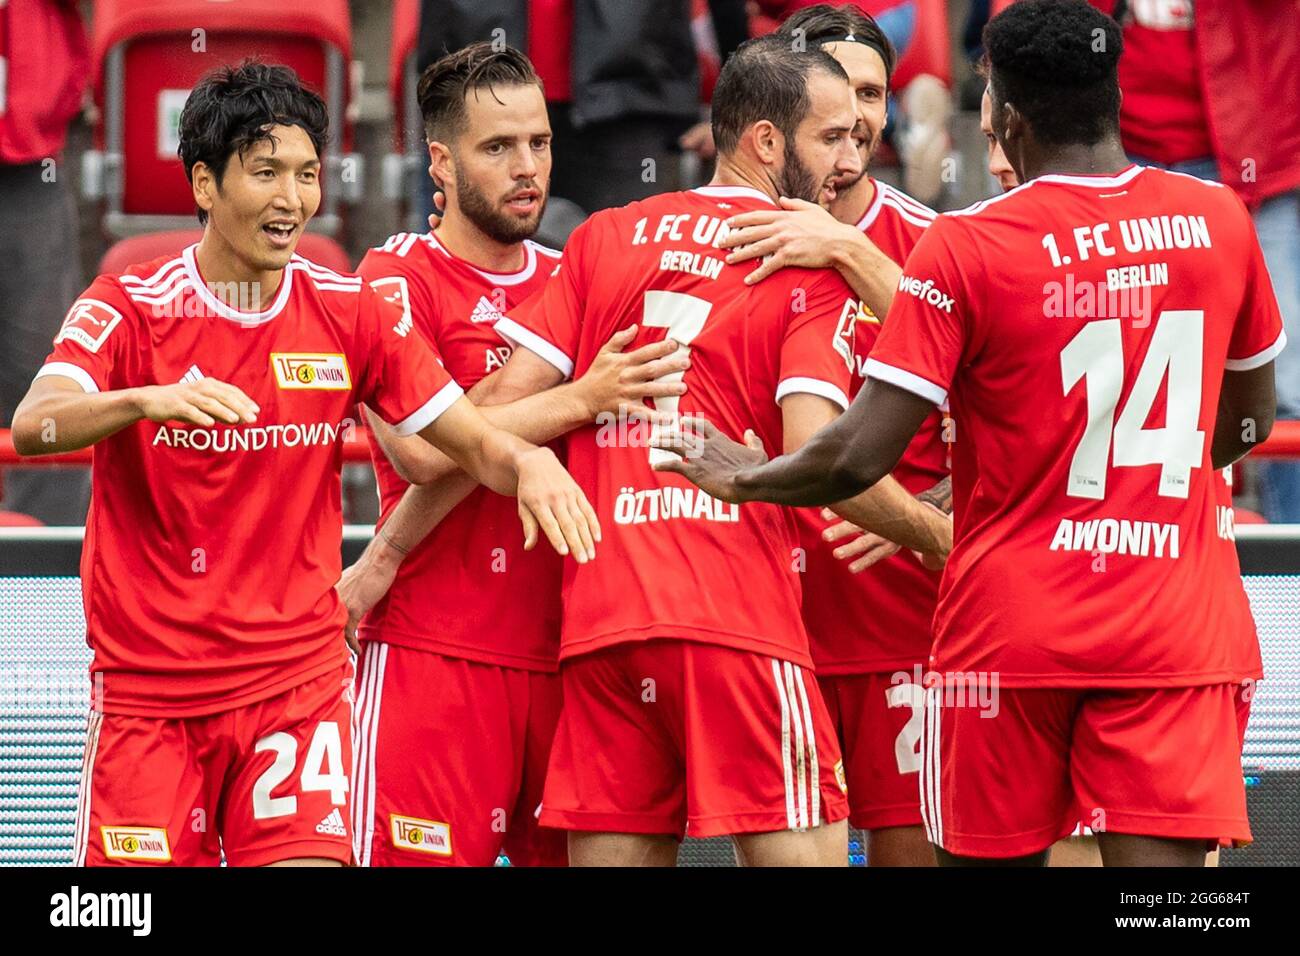 29 August 2021, Berlin: Football: Bundesliga, 1. FC Union Berlin - Borussia Mönchengladbach, Matchday 3, An der Alten Försterei. Union's Niko Gießelmann (2nd from left) celebrates with teammates Genki Haraguchi (l), Levin Öztunali (3rd from left), Christopher Trimmel and Taiwo Awoniyi (r) after scoring the 1:0 goal. Photo: Andreas Gora/dpa - IMPORTANT NOTE: In accordance with the regulations of the DFL Deutsche Fußball Liga and/or the DFB Deutscher Fußball-Bund, it is prohibited to use or have used photographs taken in the stadium and/or of the match in the form of sequence pictures and/or vid Stock Photo